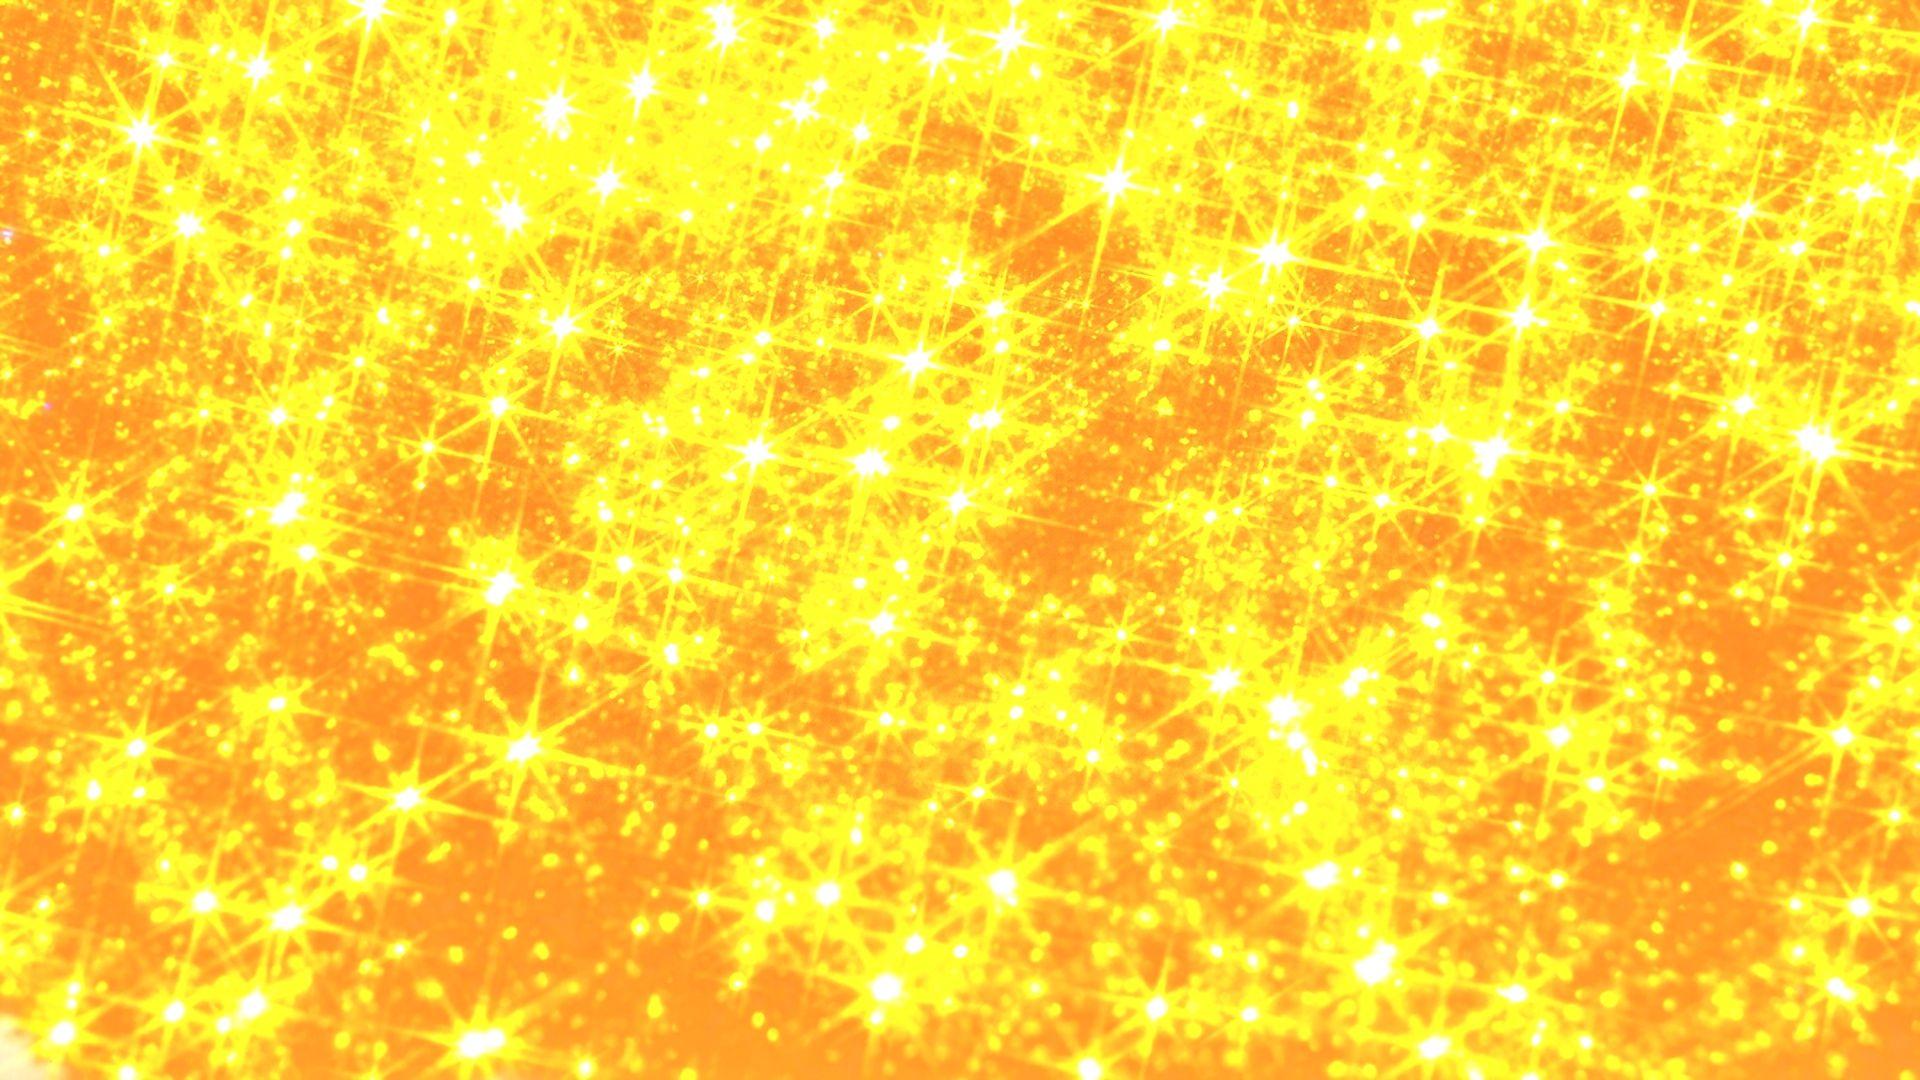 Sparkly Golden Wallpapers Wallpaper Cave